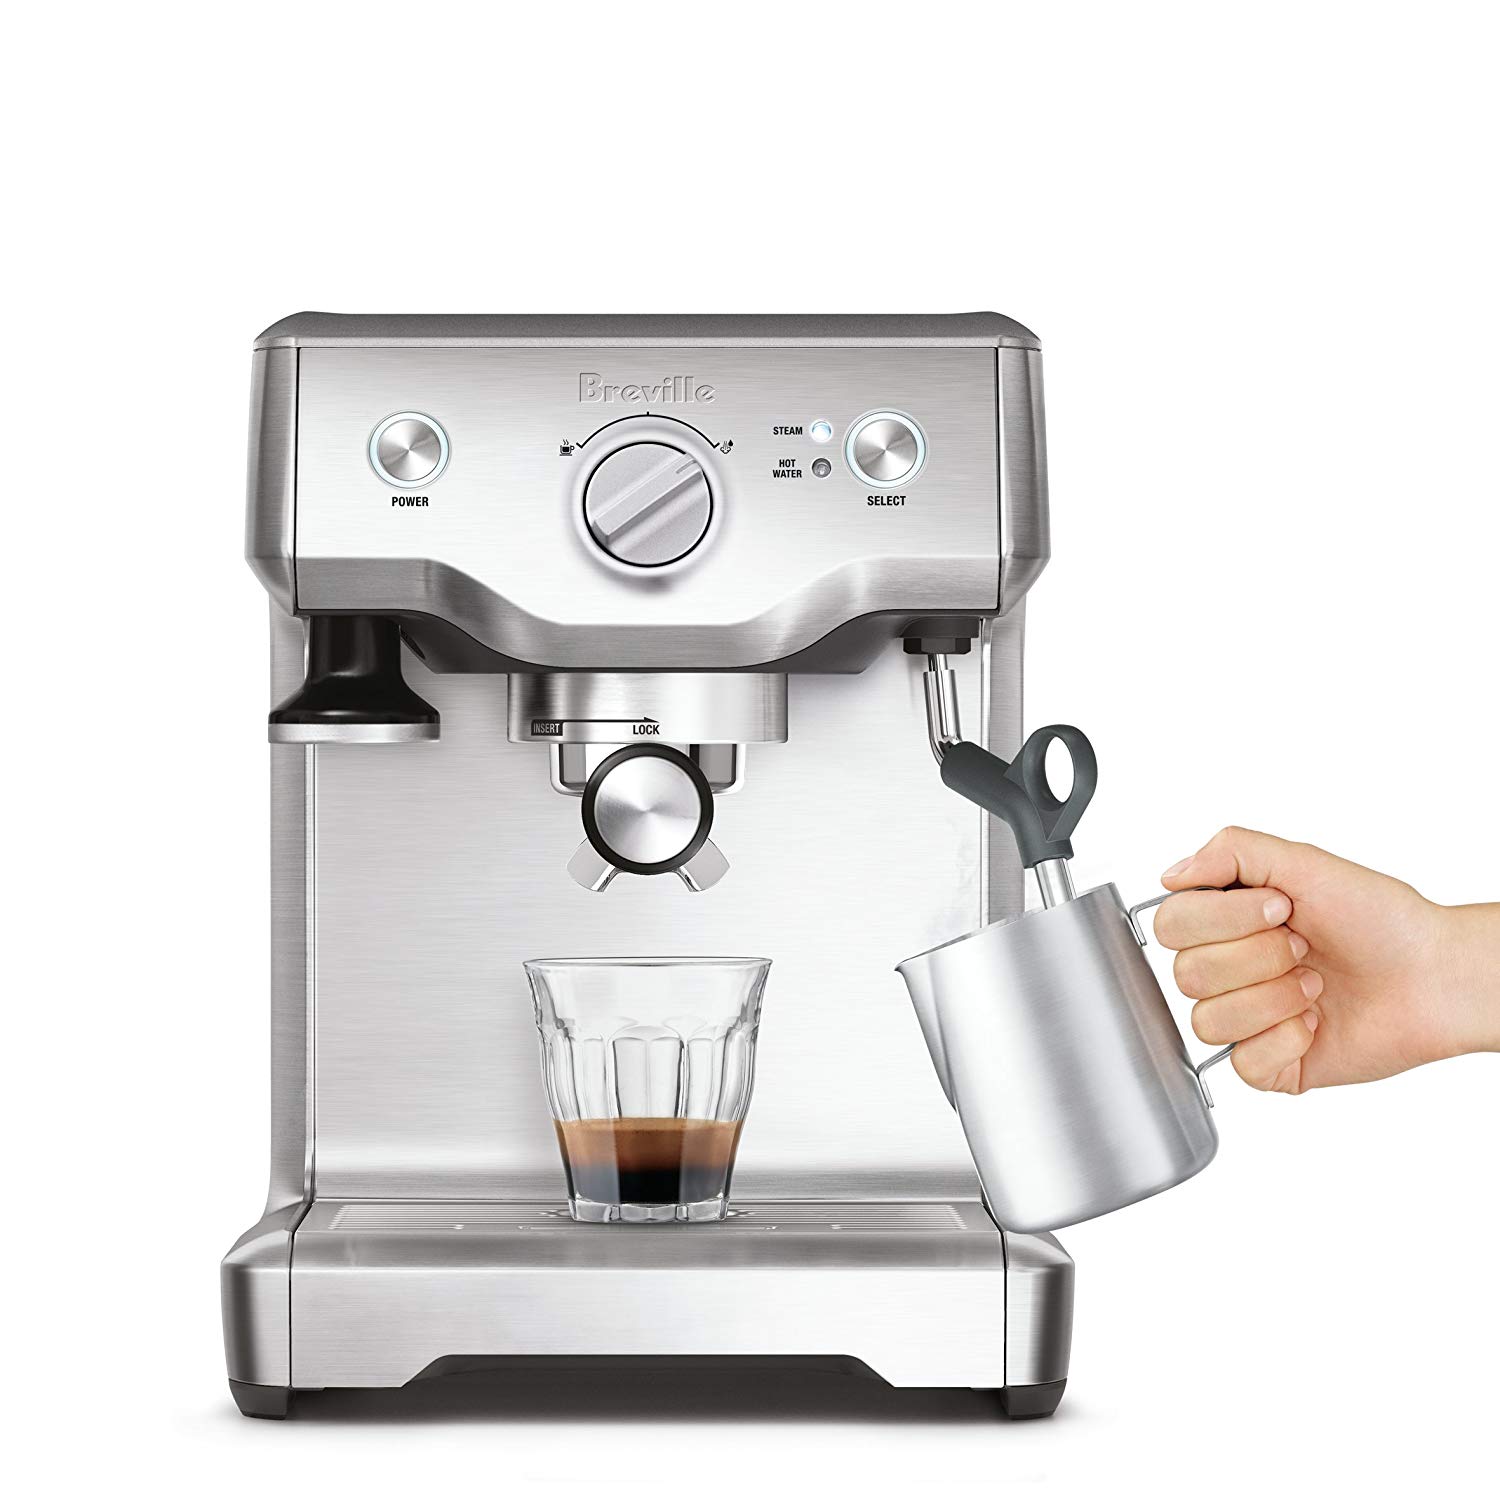 Breville Duo Temp Pro Espresso Machine,61 Fluid Ounces, Stainless Steel, BES810BSS - image 2 of 4